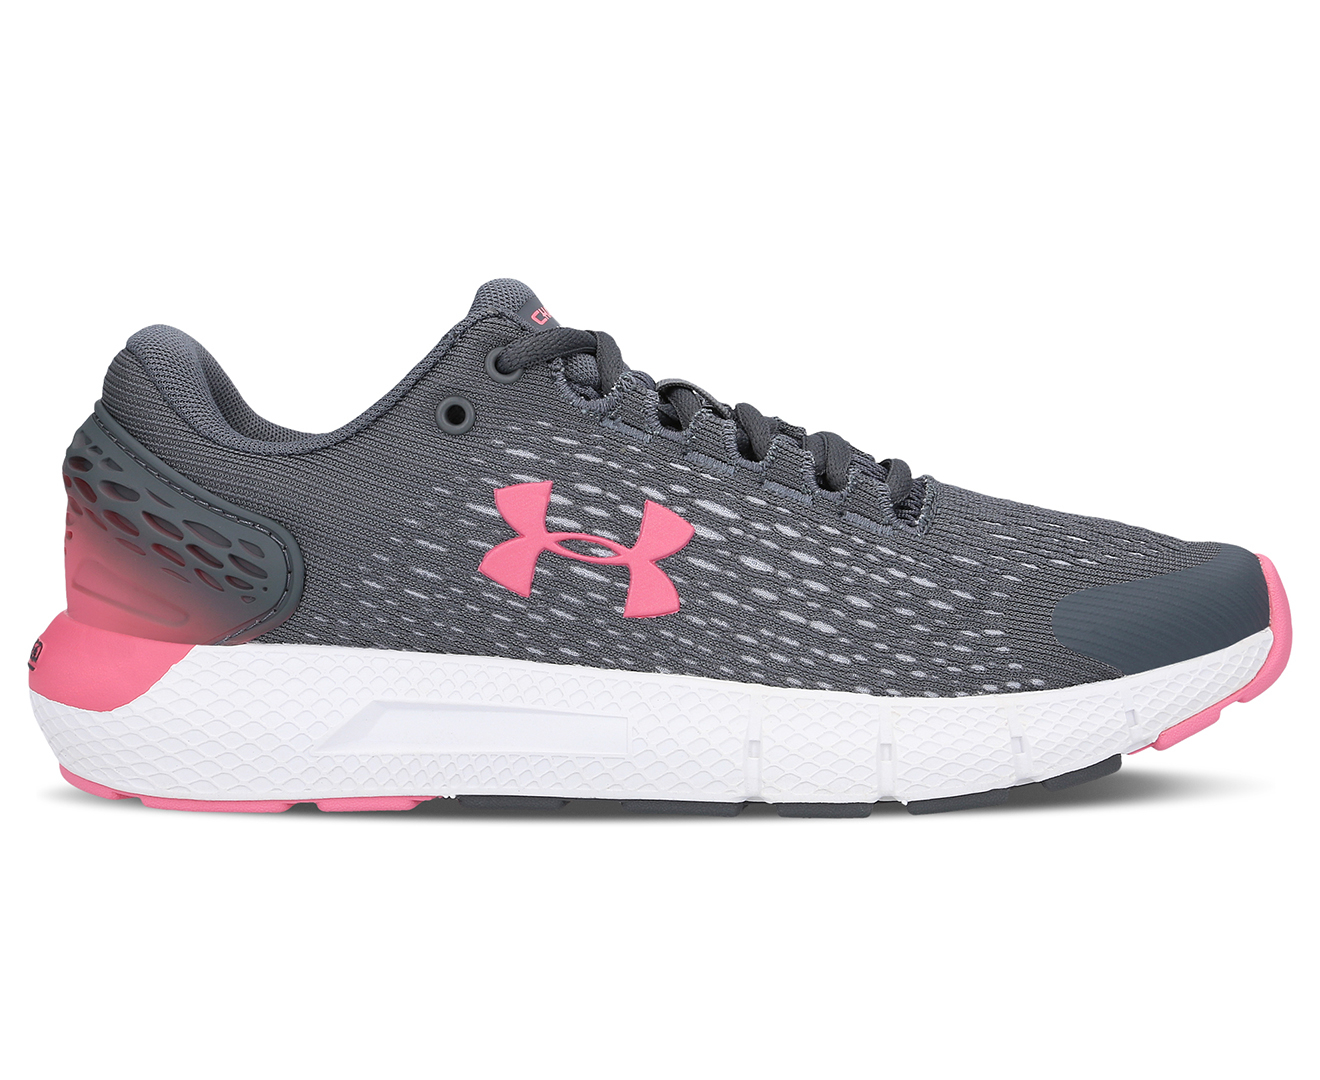 Under Armour Women's Charged Rogue 2 Running Shoes - Pitch Grey/White ...